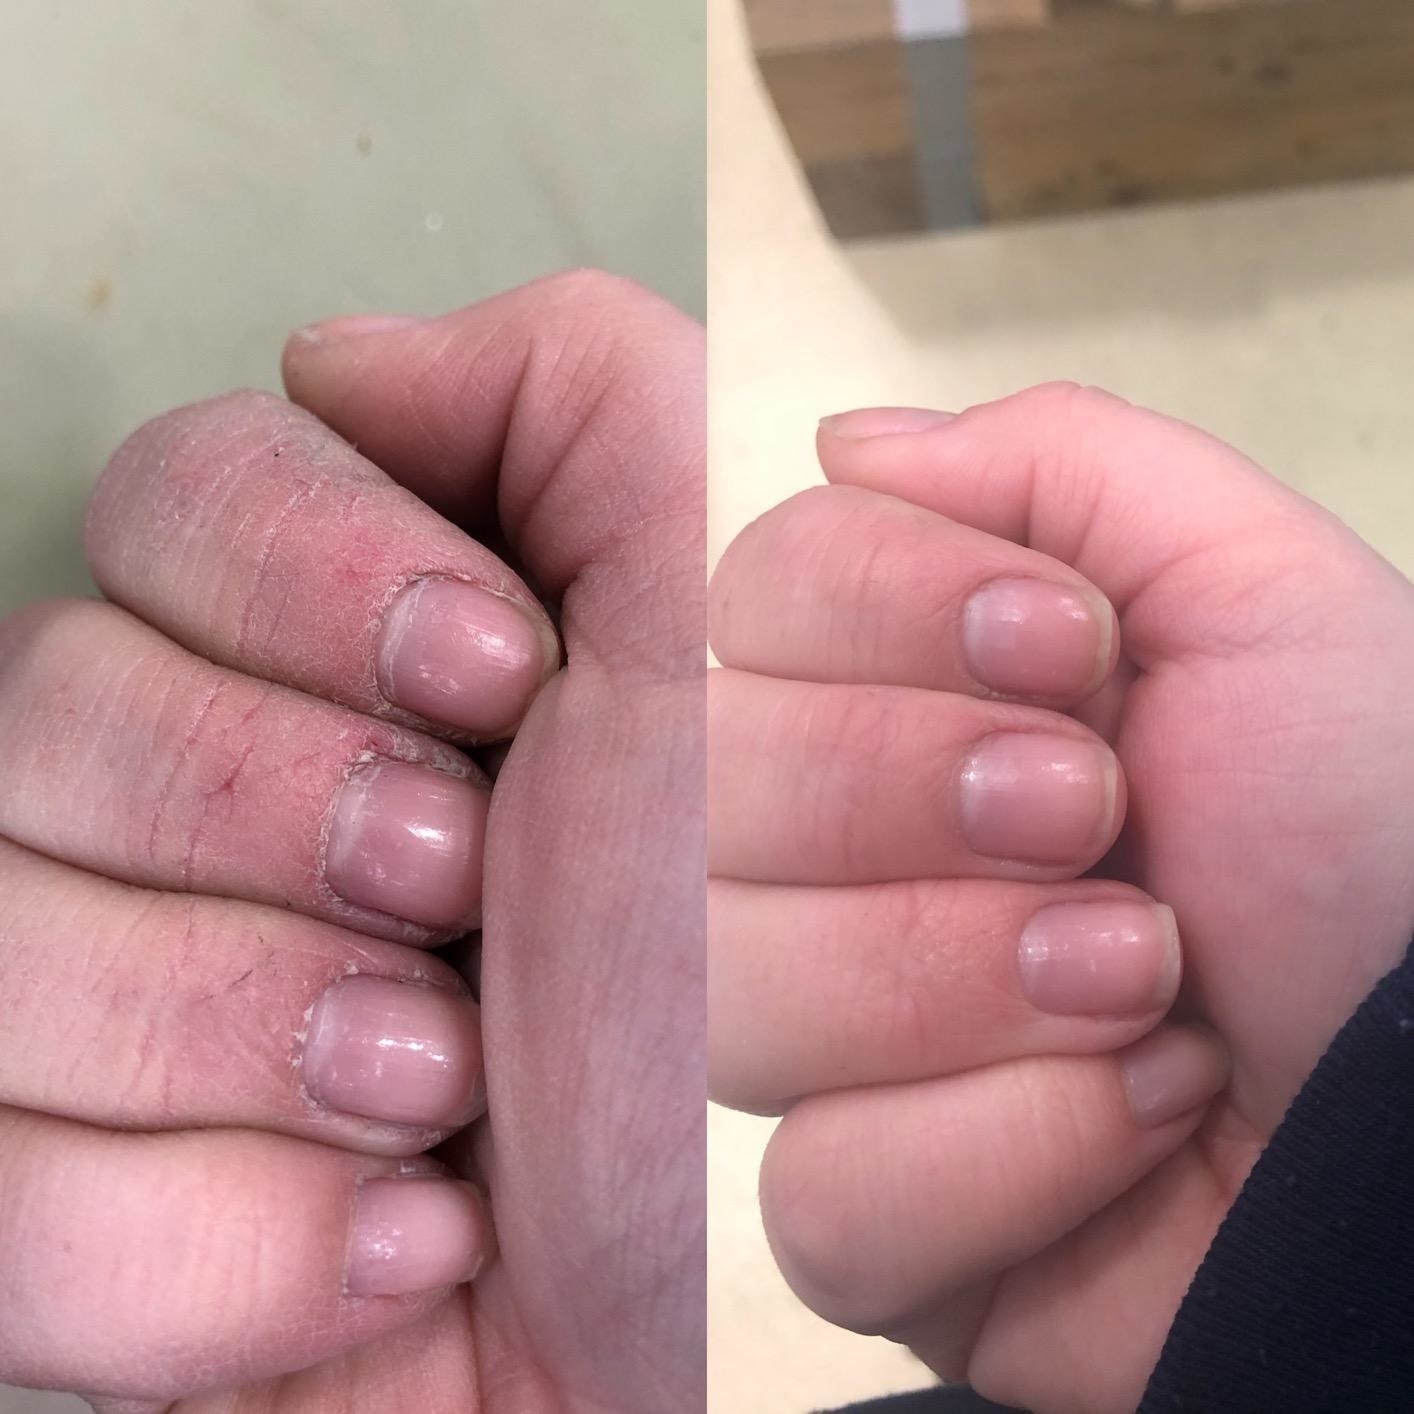 A split image of a reviewers cracked dry hands before using hand cream and moisturized hands after using hand lotion